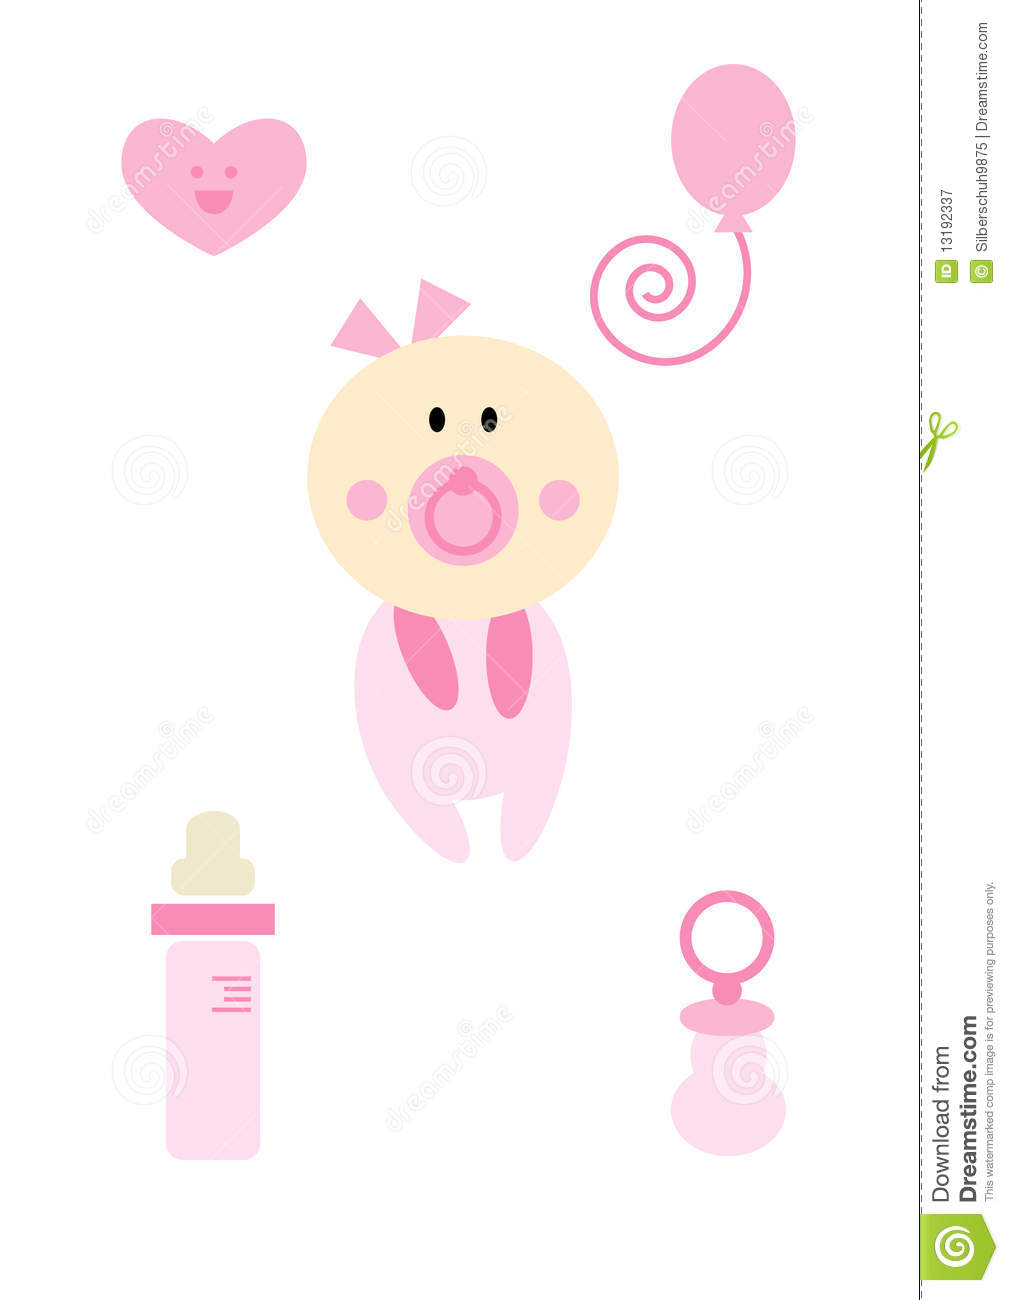 Clipart Set  Baby Girl  Pink  Royalty Free Stock Photography   Image